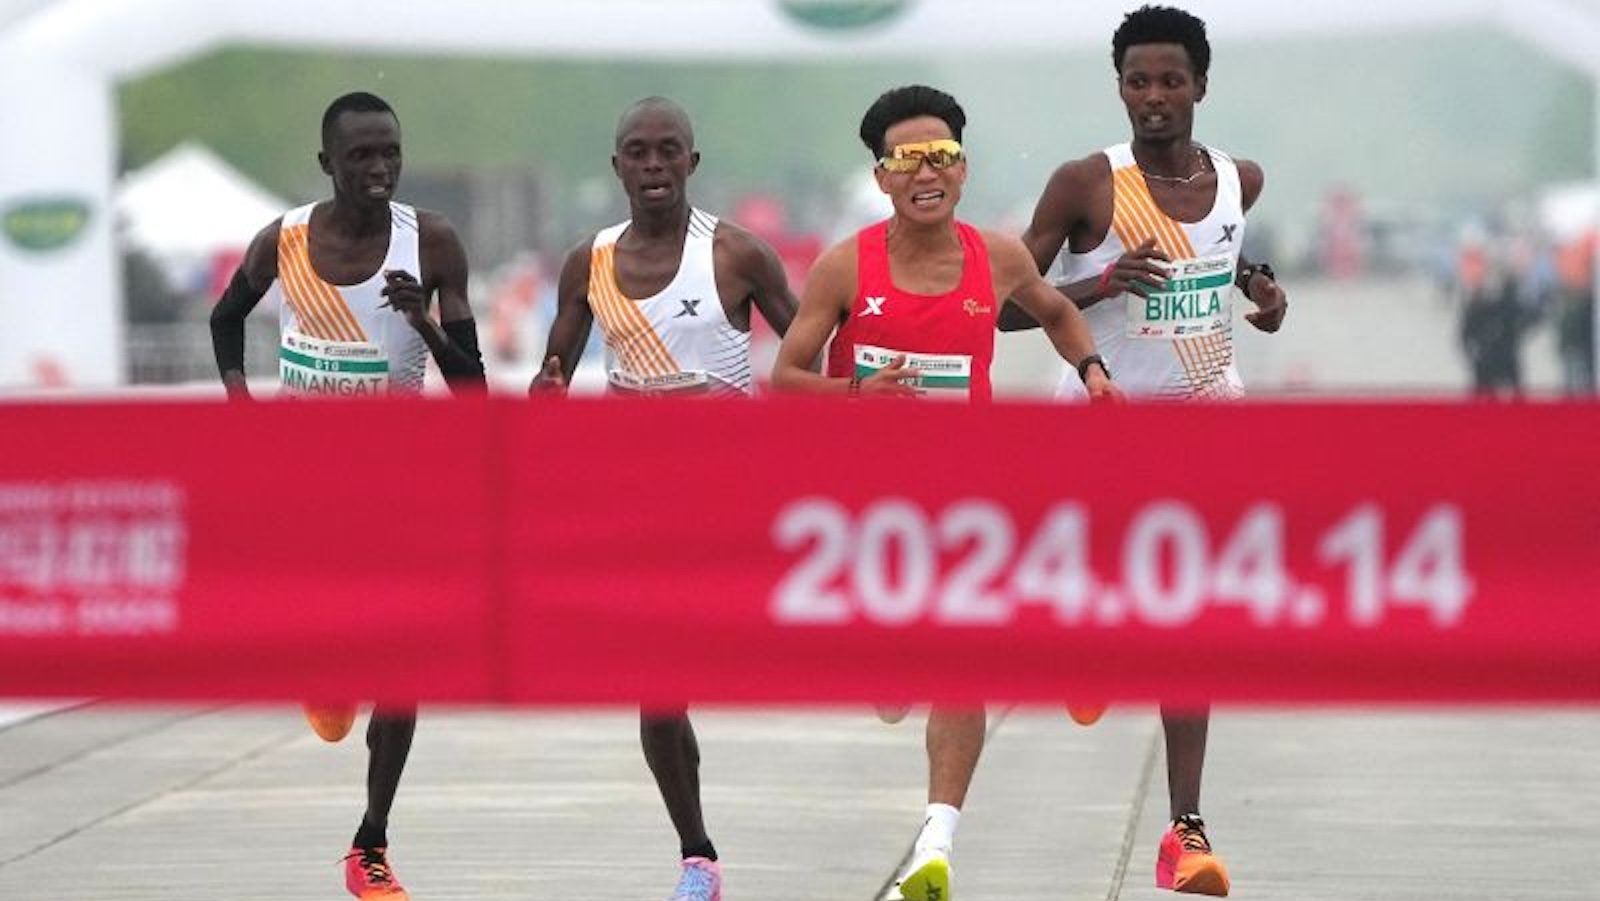 A Chinese runner's victory in the Beijing Half Marathon leaves no doubt that his rivals let him win